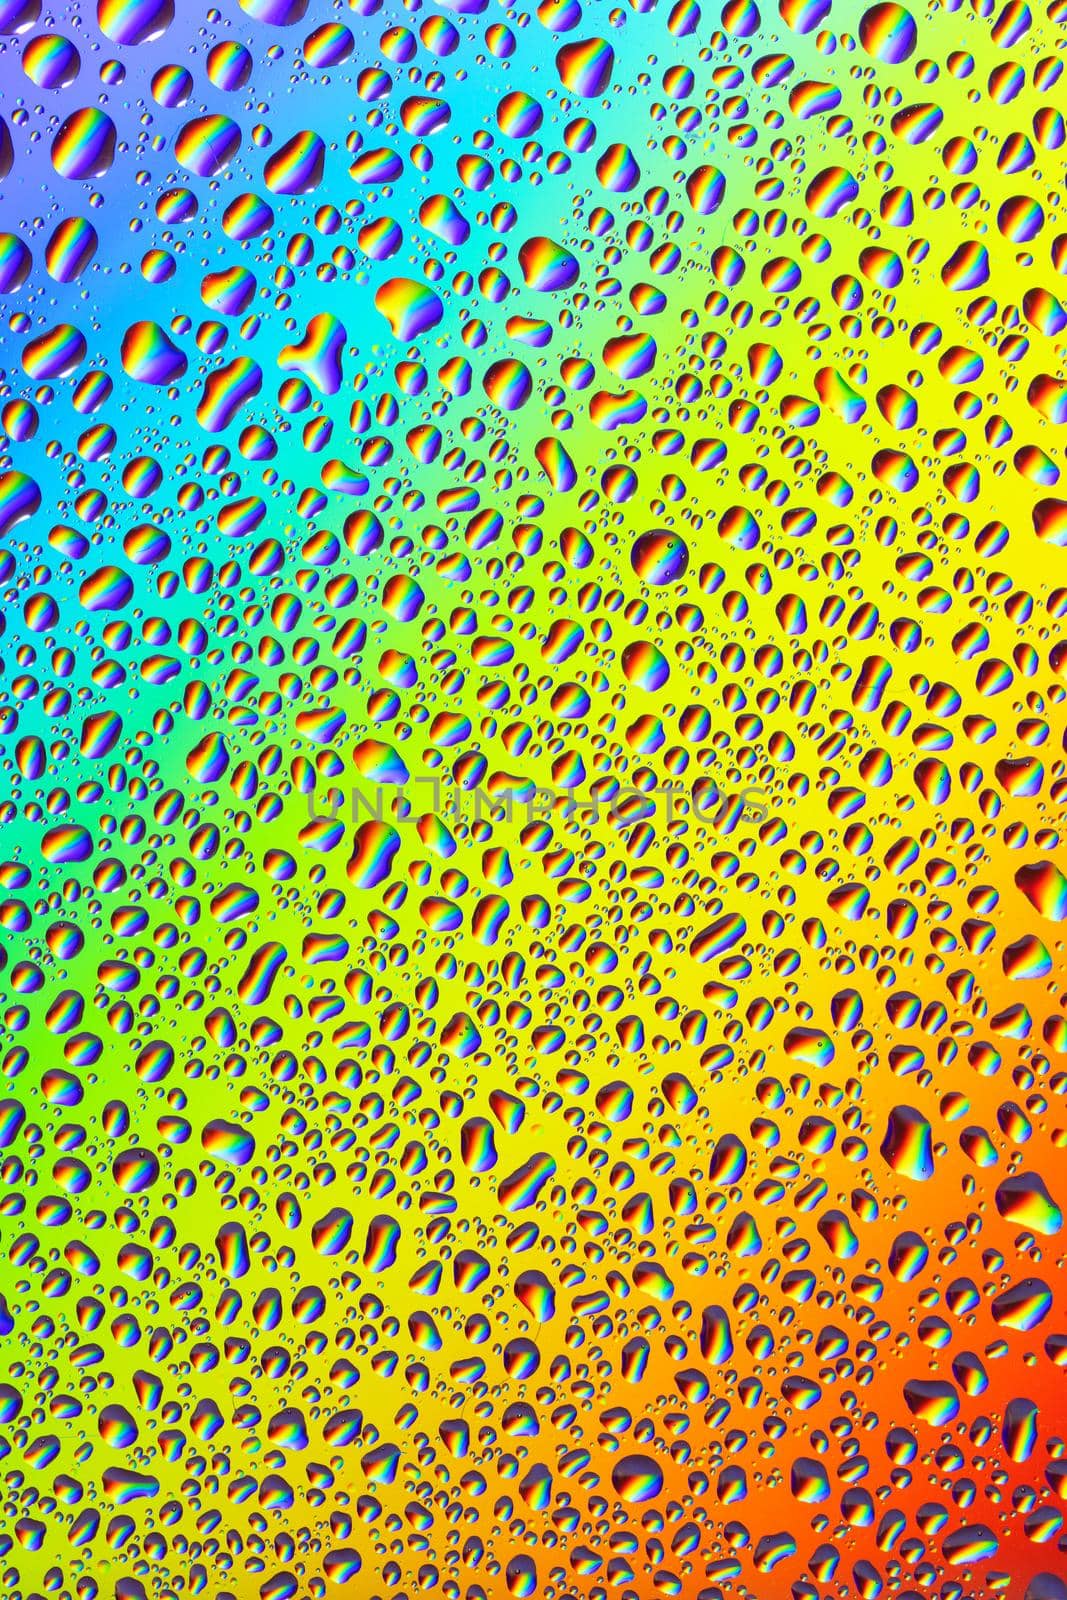 Water drops on a bright rainbow background, close-up. by Sergii